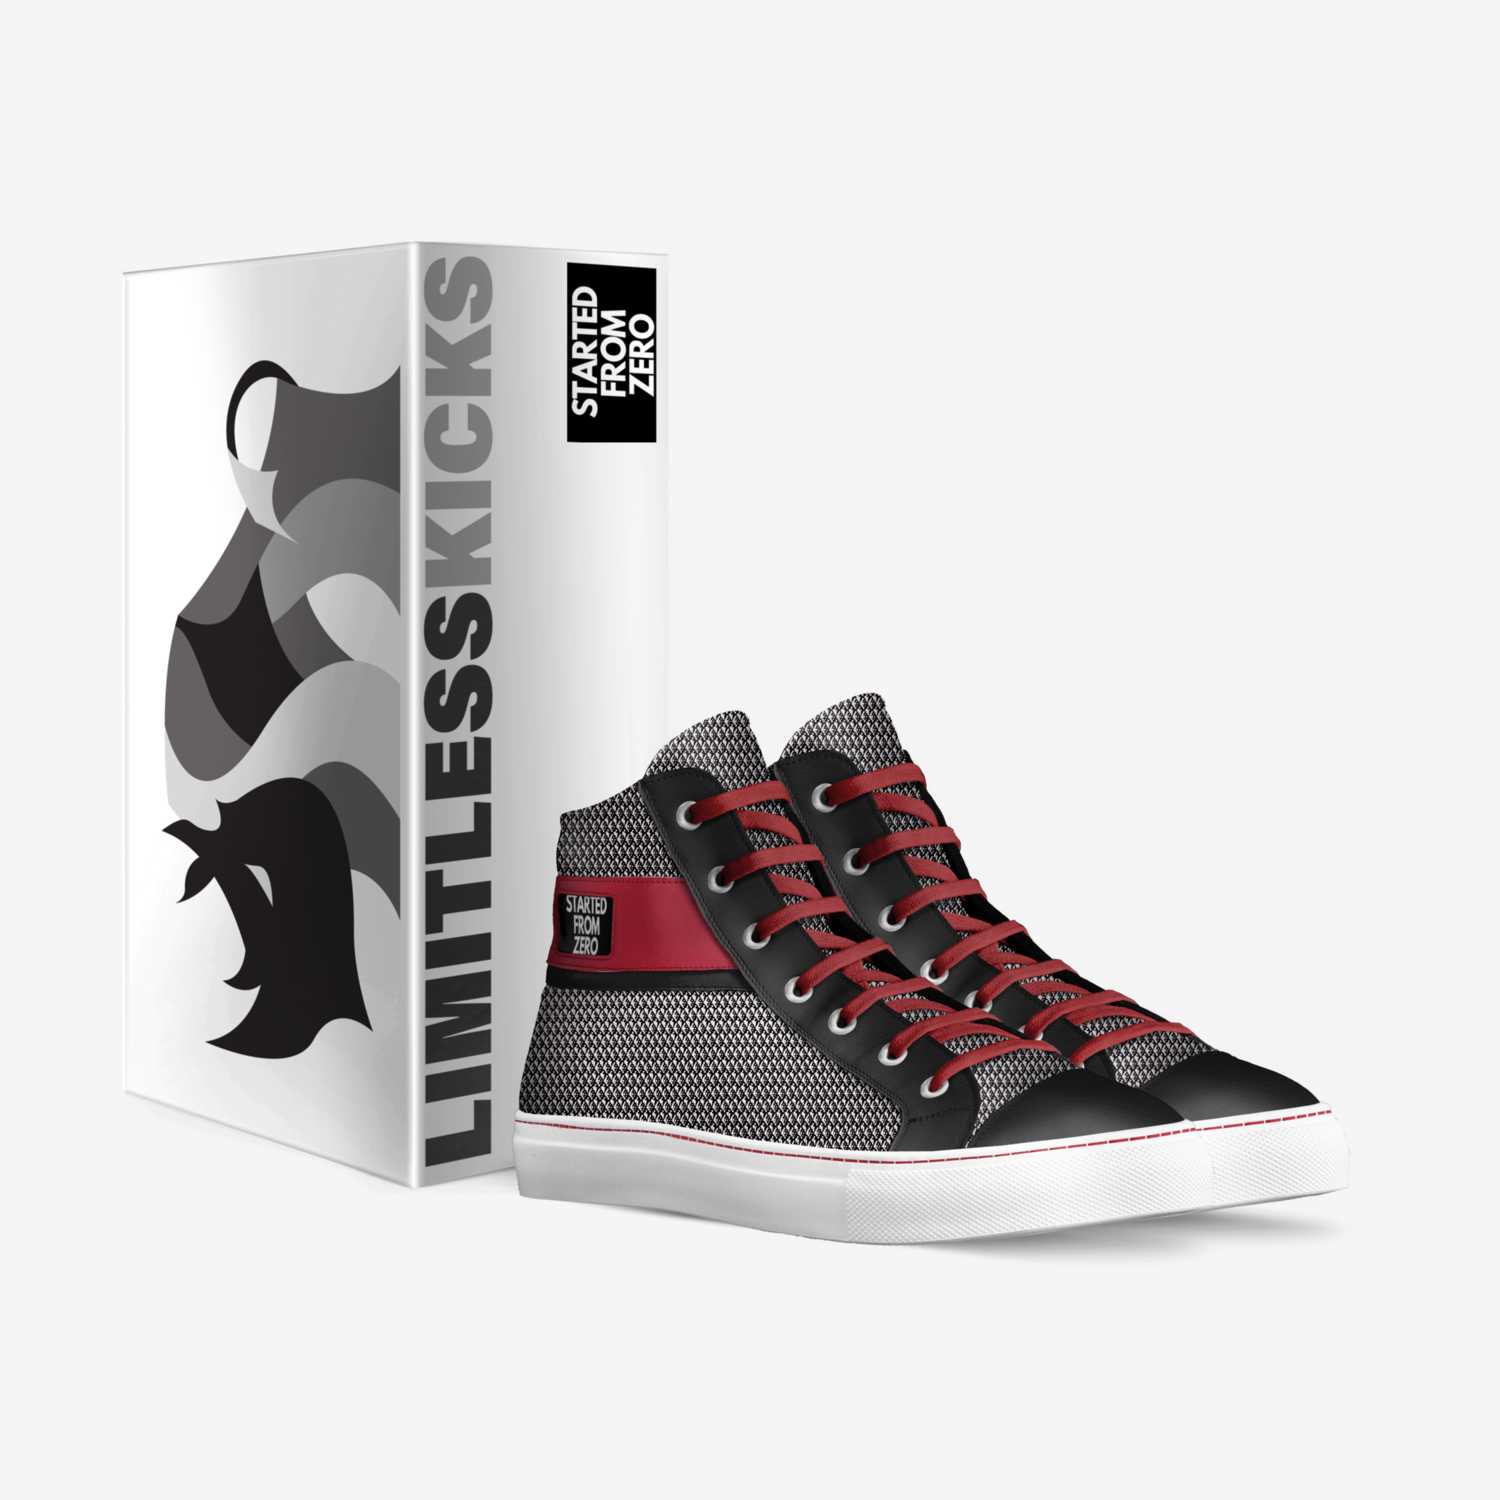 STARTED FROM ZERO custom made in Italy shoes by Limitless Kicks | Box view